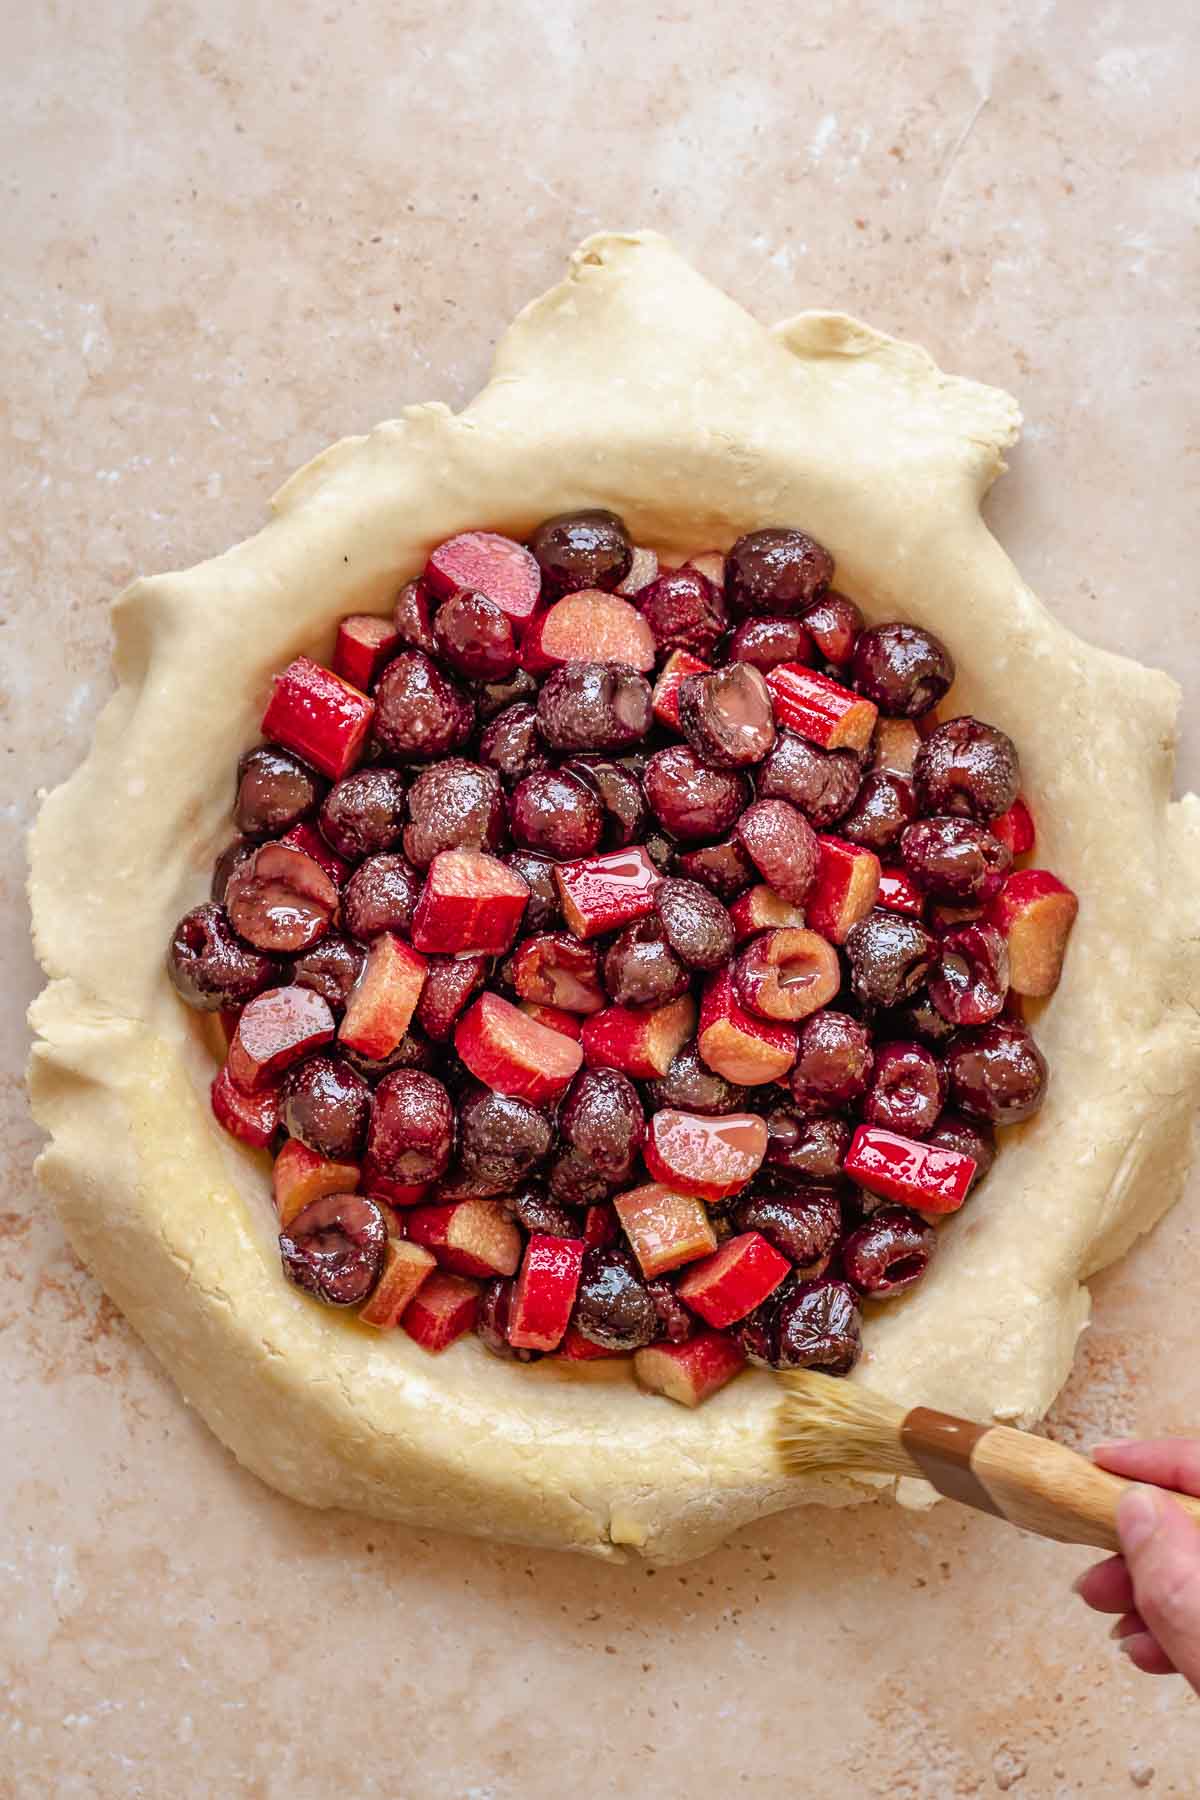 Cherries and rhubarb in the center of the pie crust. A pastry brush adds egg wash to the edges.